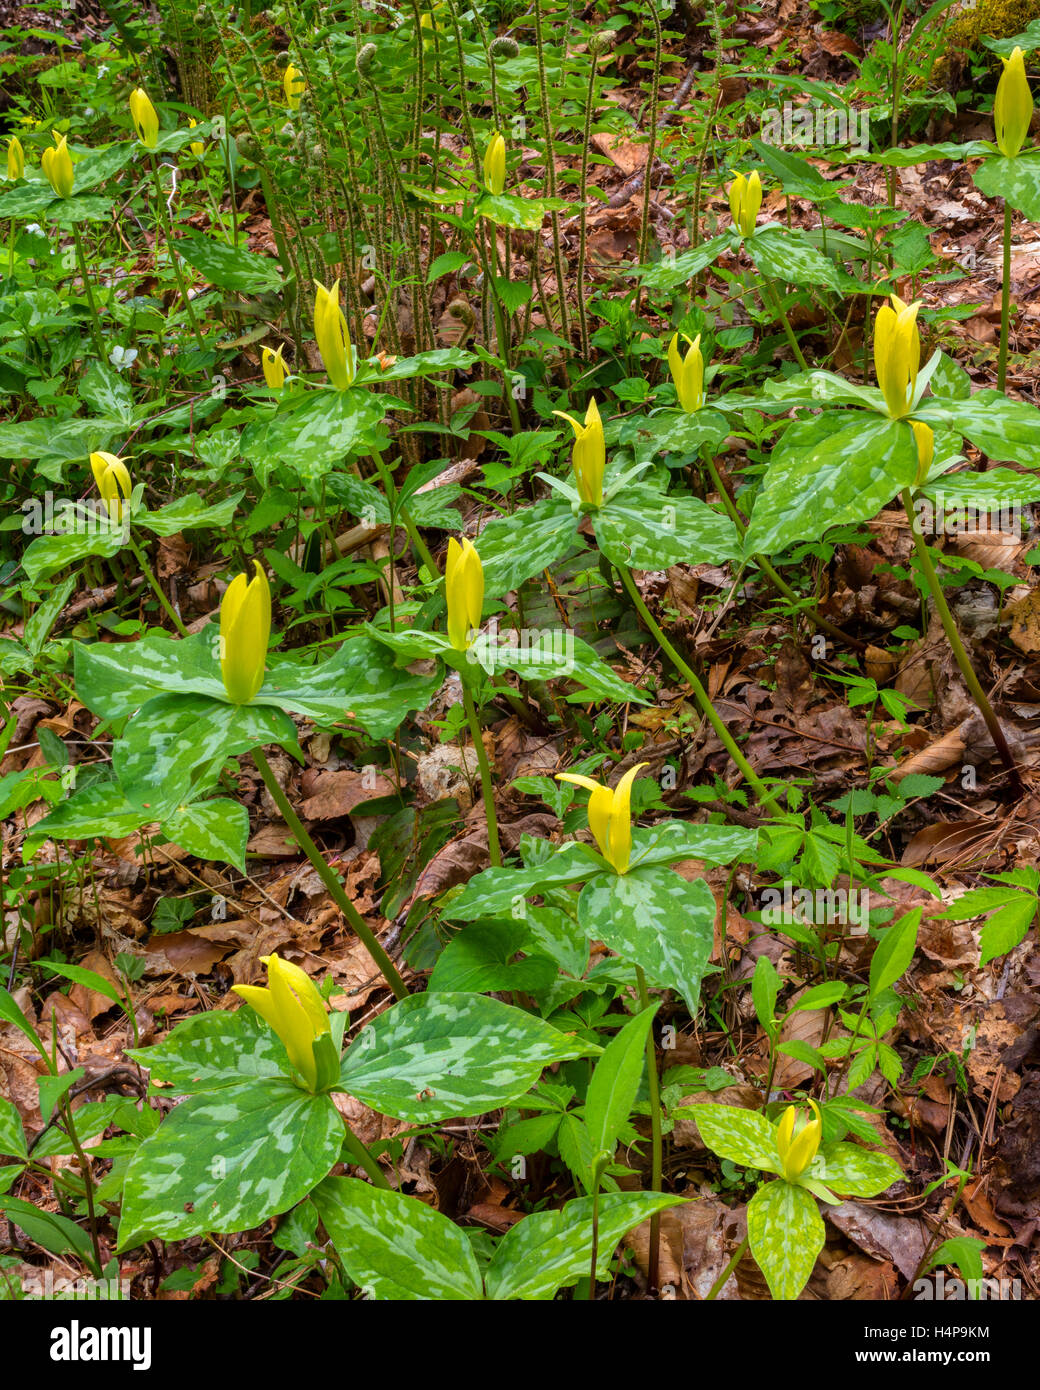 Great Smoky Mountains National Park, Tennessee: Yellow trillium (Trillium luteum) blooming in forest understory Stock Photo